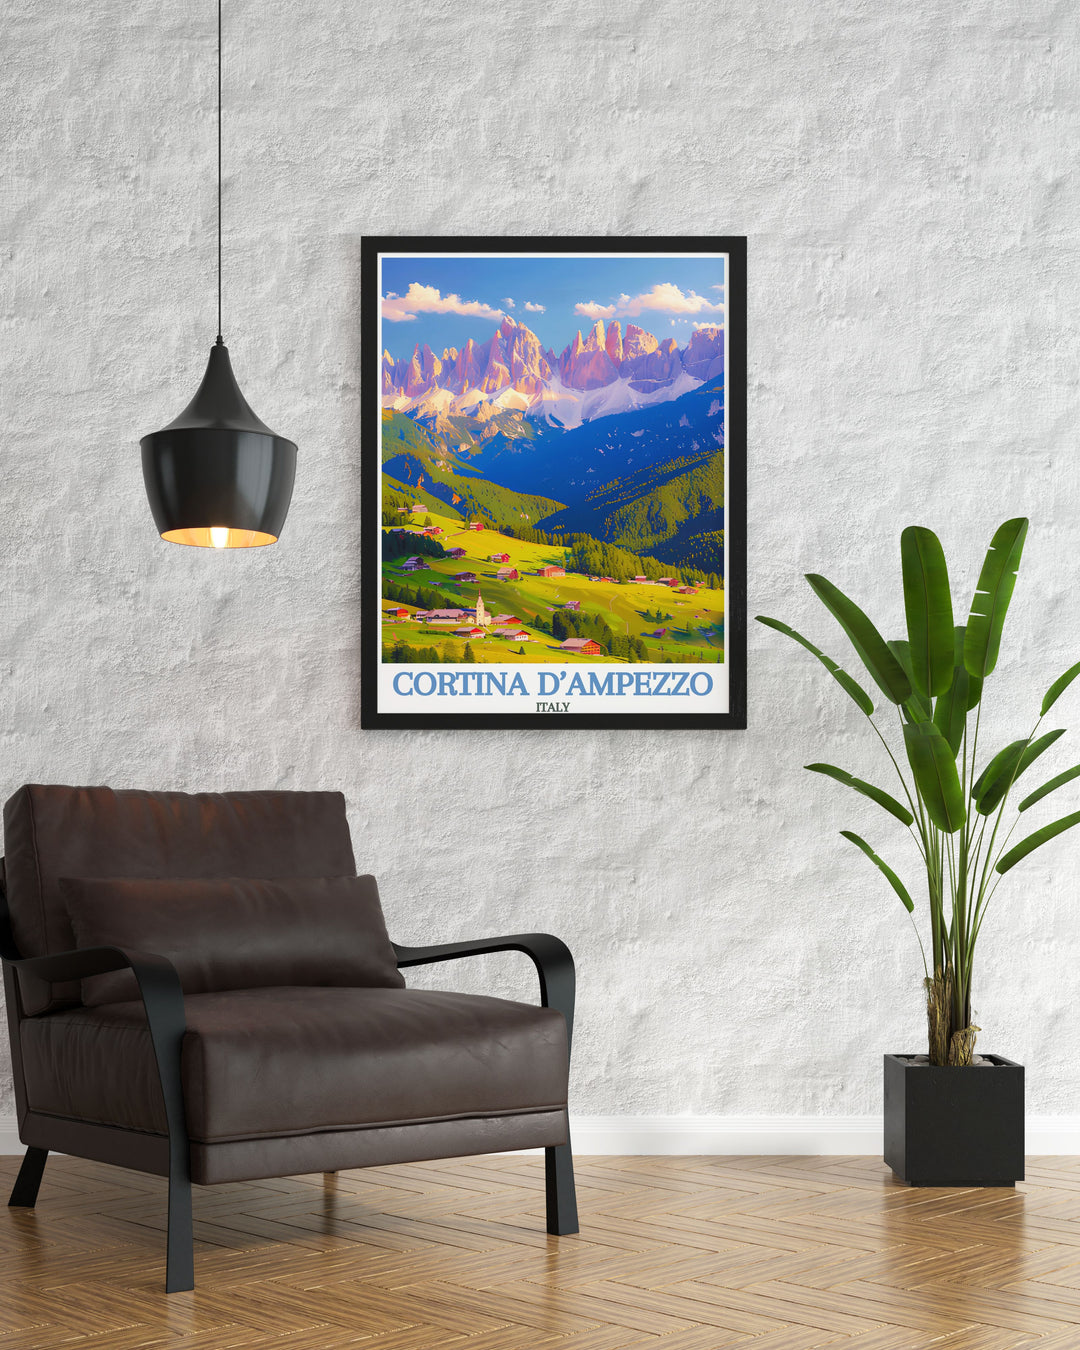 Explore the scenic beauty of the Dolomite Mountains and Cortina dAmpezzo with our detailed art prints. From the majestic peaks to the charming town center, these prints offer a visual journey through one of Italys most picturesque regions.